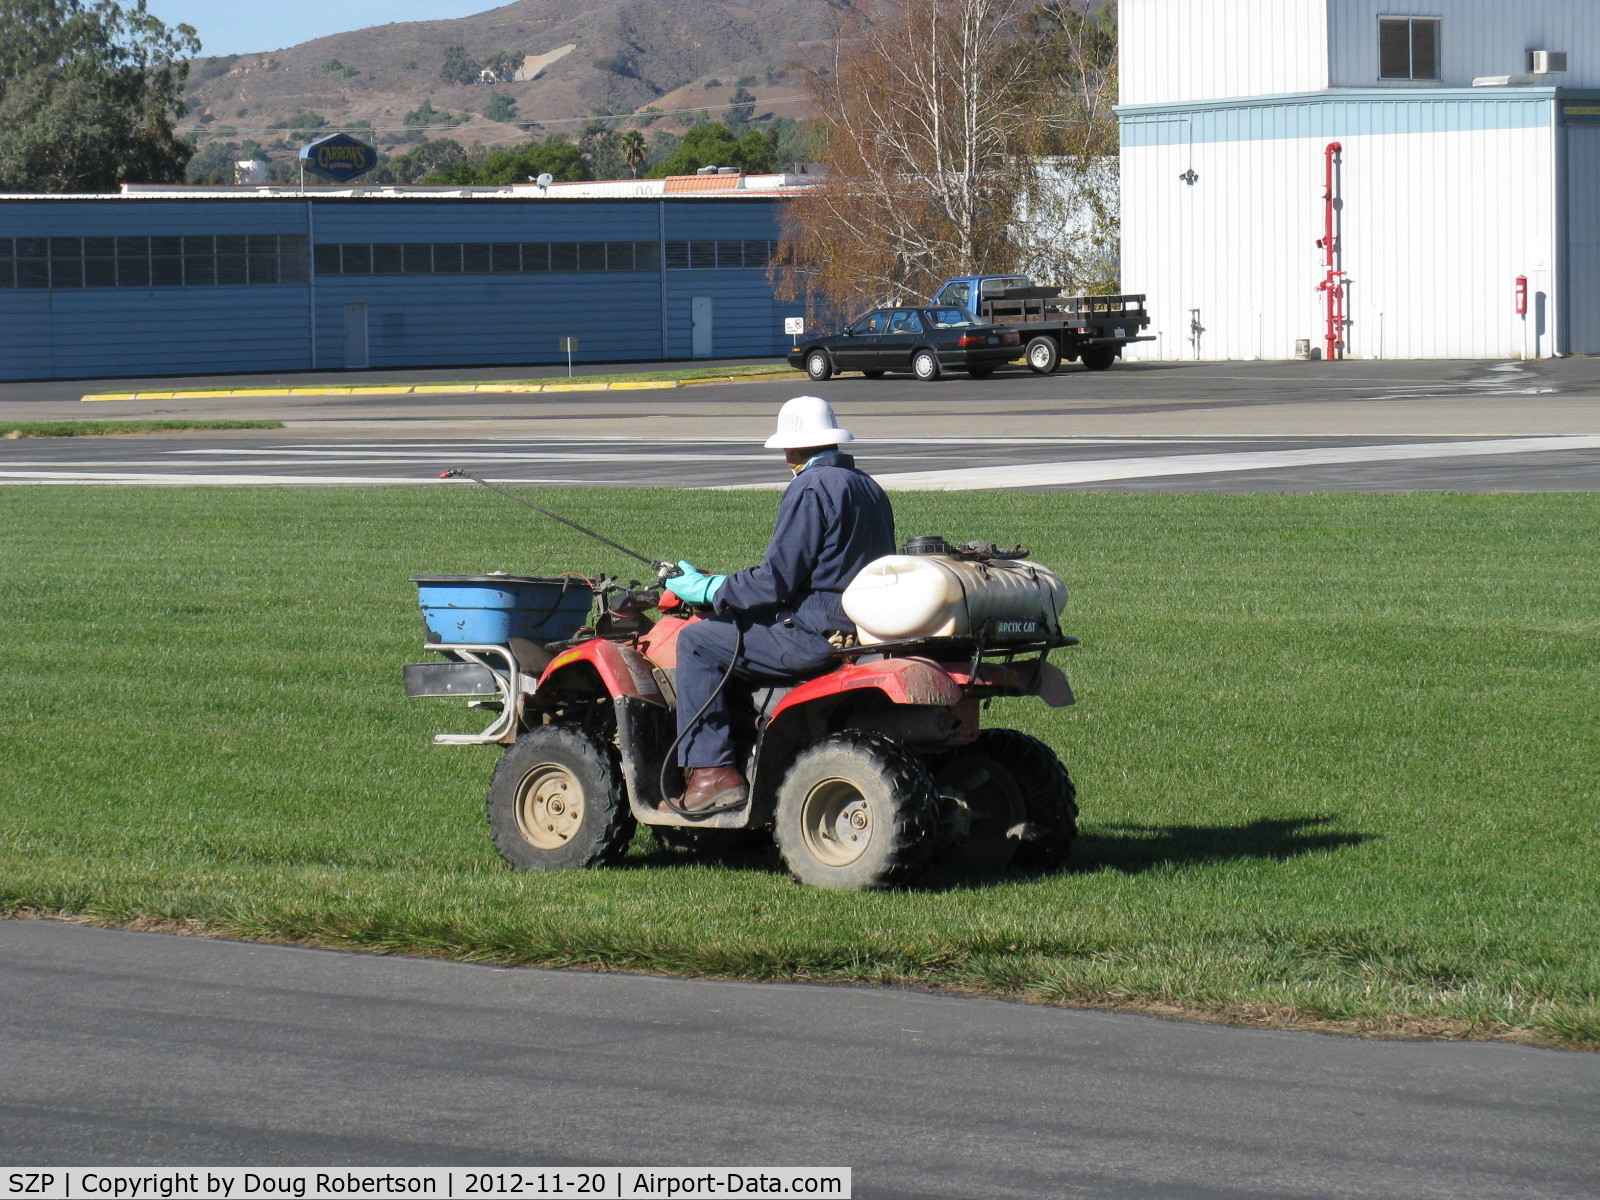 Santa Paula Airport (SZP) - Slow commercial spraying with extended hand nozzle-Rwy 22L grass. Breathing mask, gloves worn.